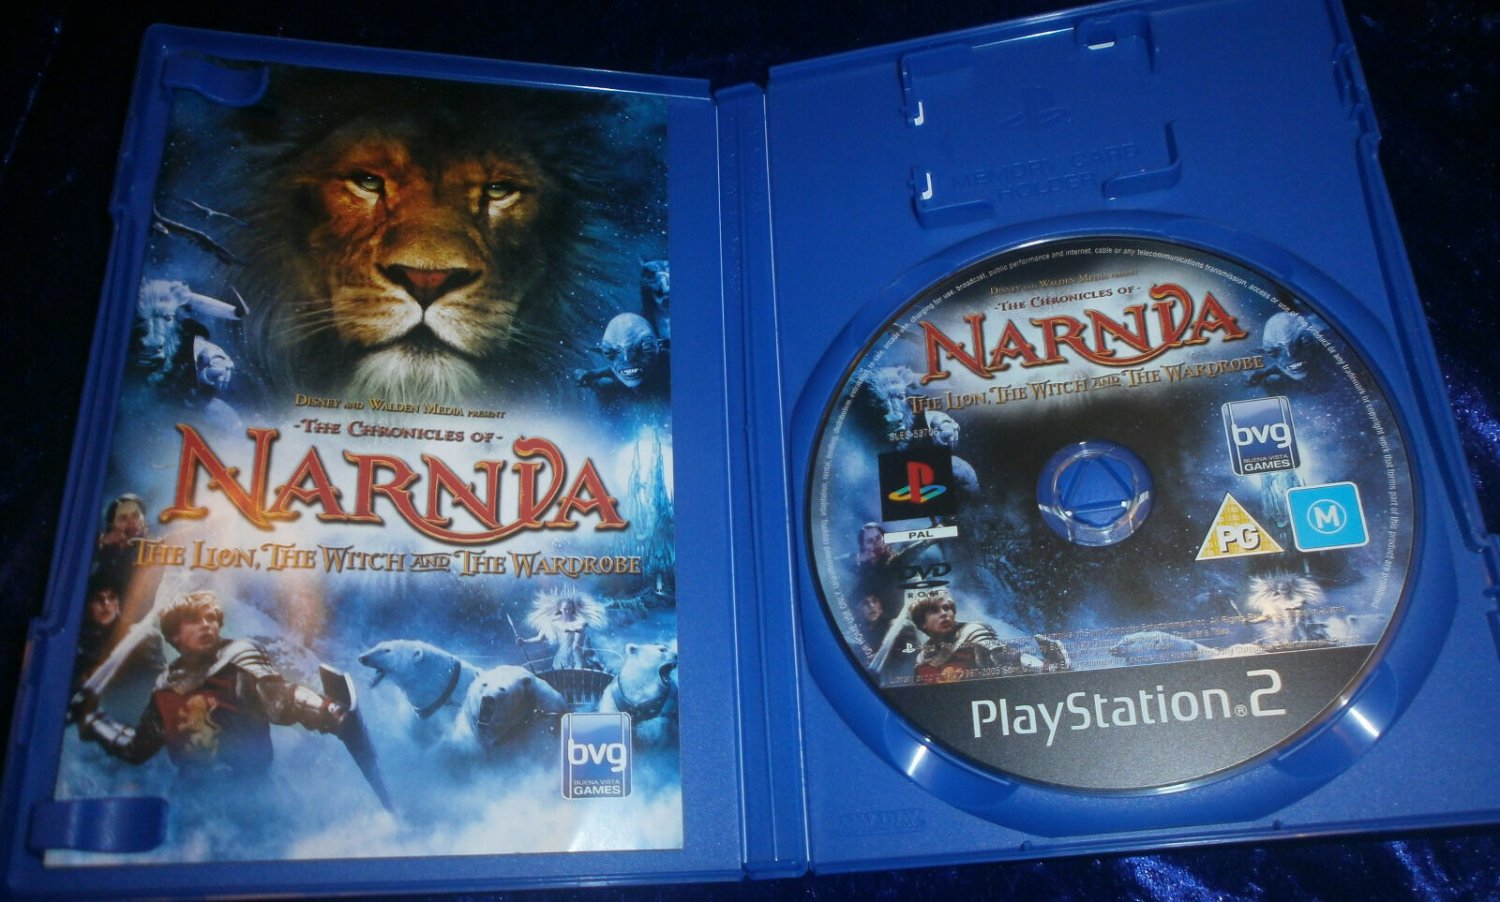 Chronicles of Narnia The Lion The Witch and the Wardrobe BVG PS2 RPG Game